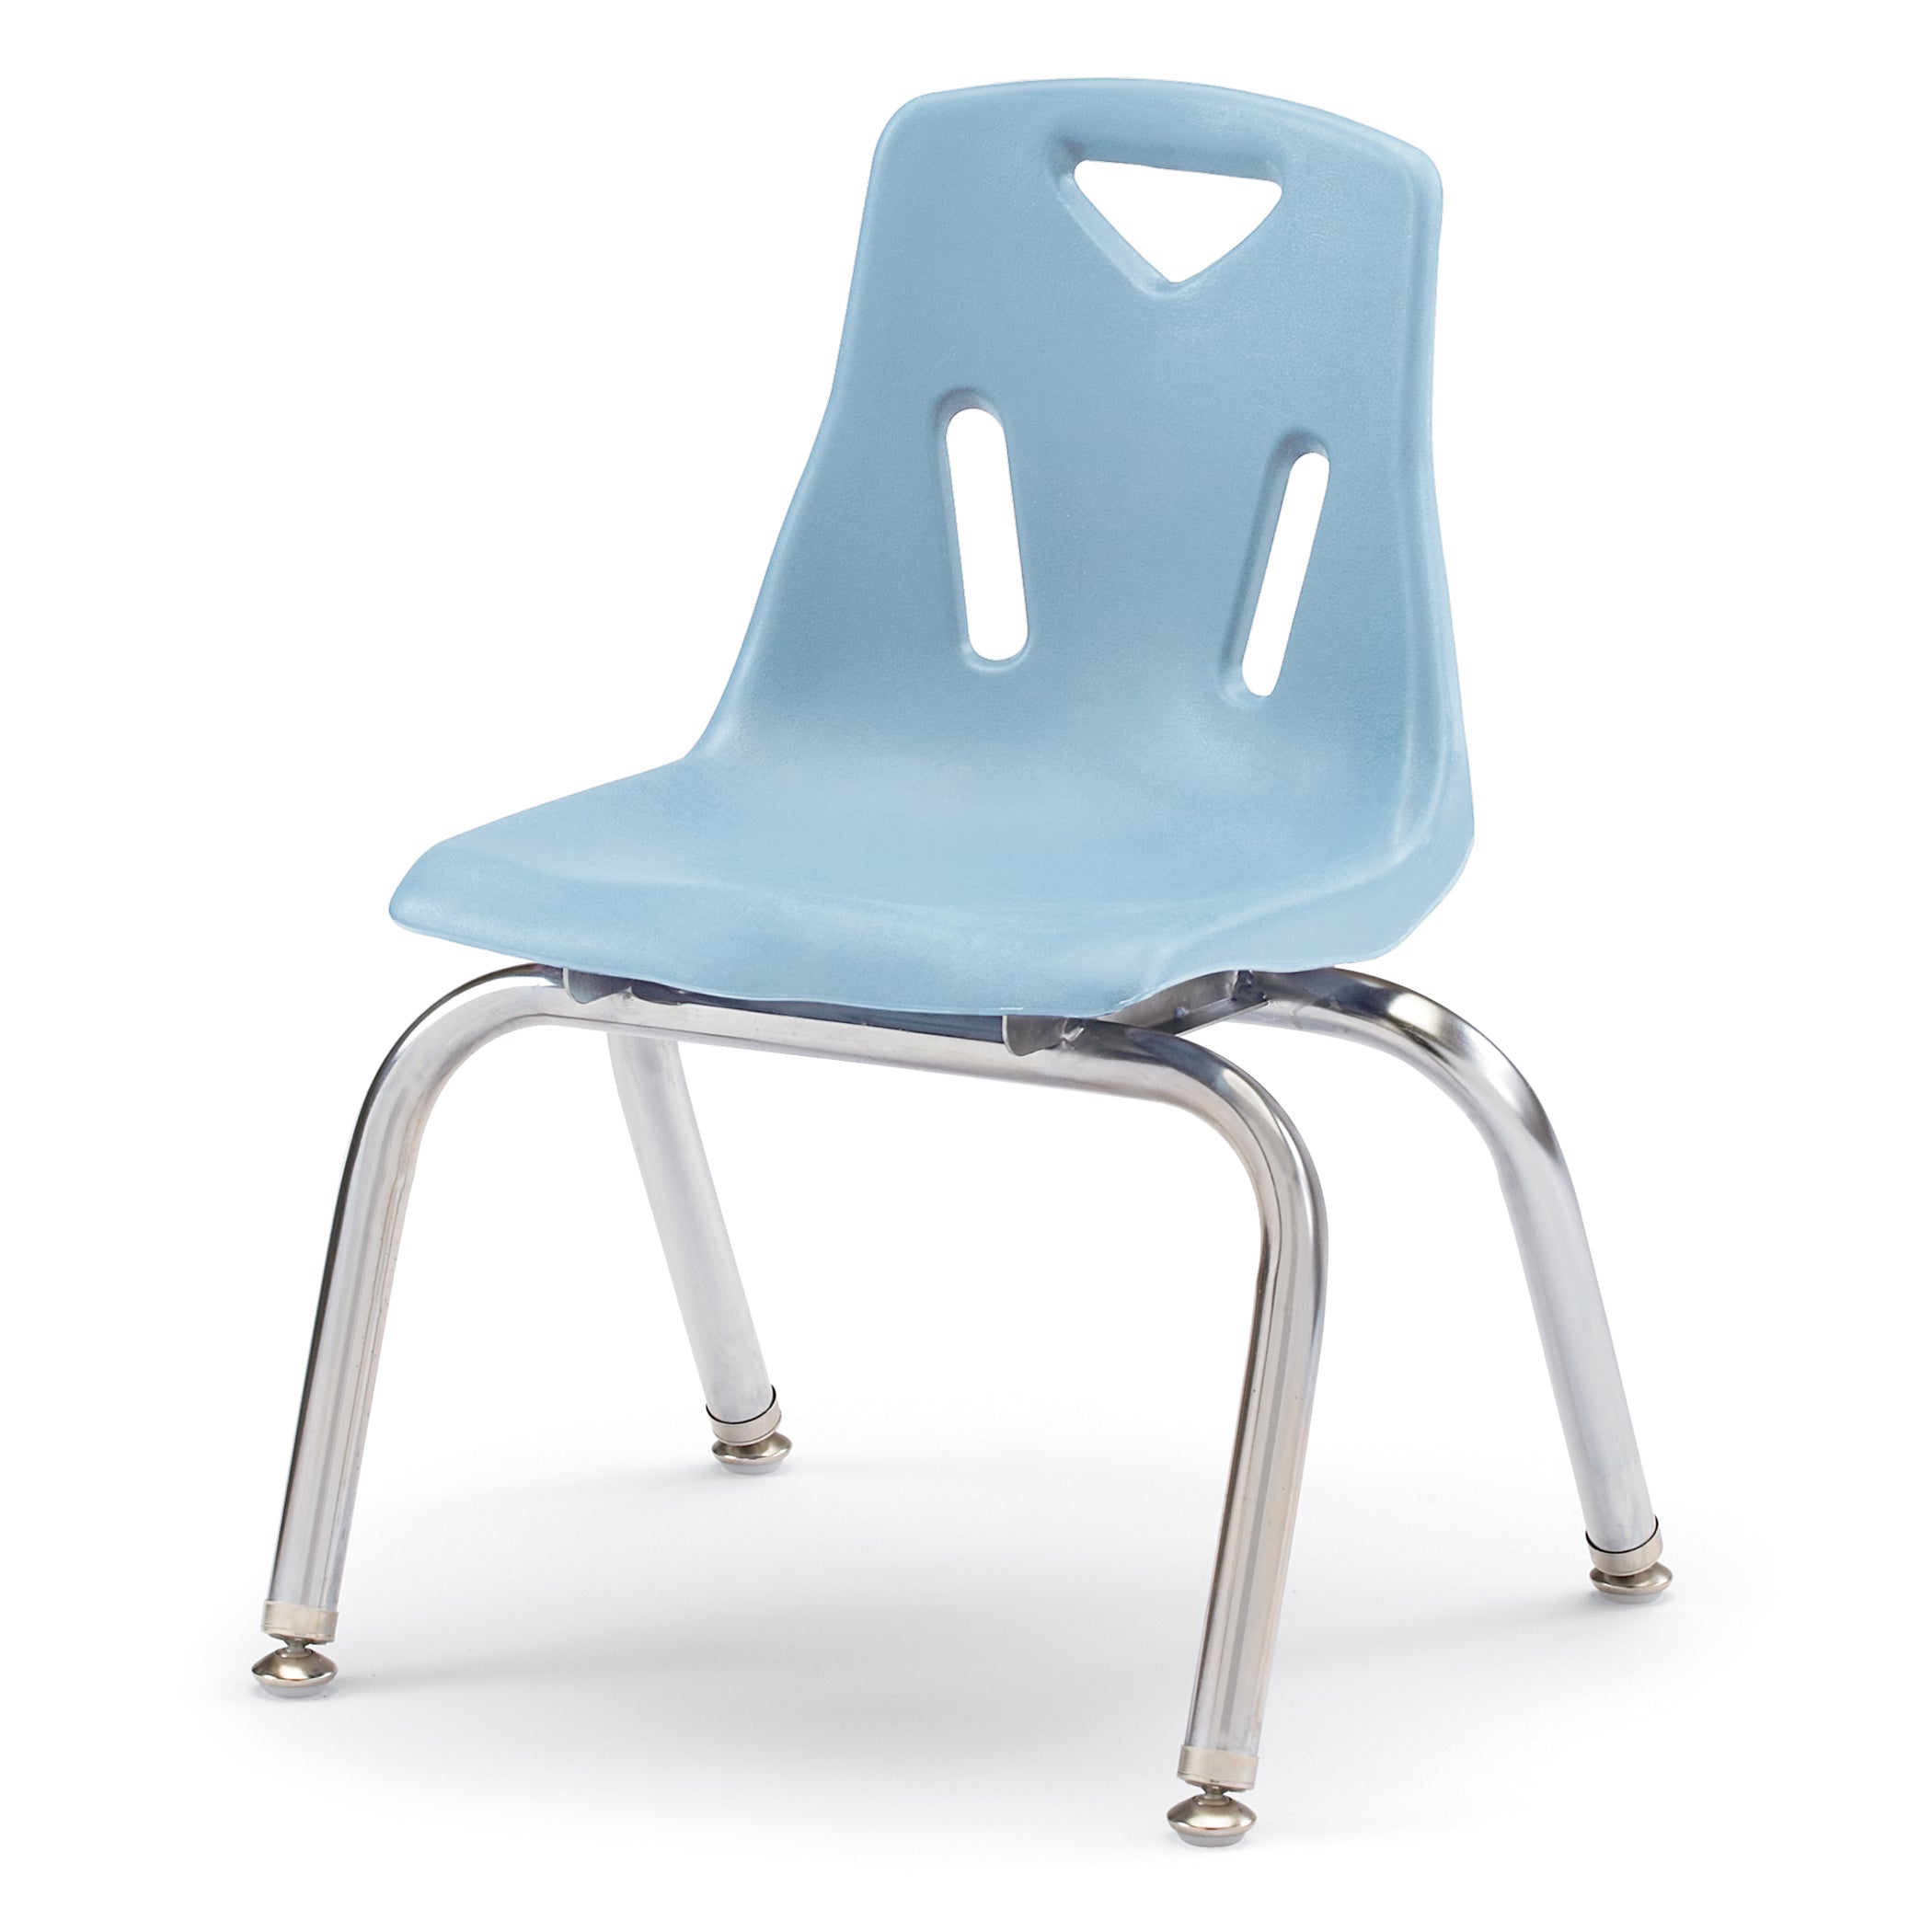 8142JC6131, Berries Stacking Chair with Chrome-Plated Legs - 12" Ht - Set of 6 - Coastal Blue